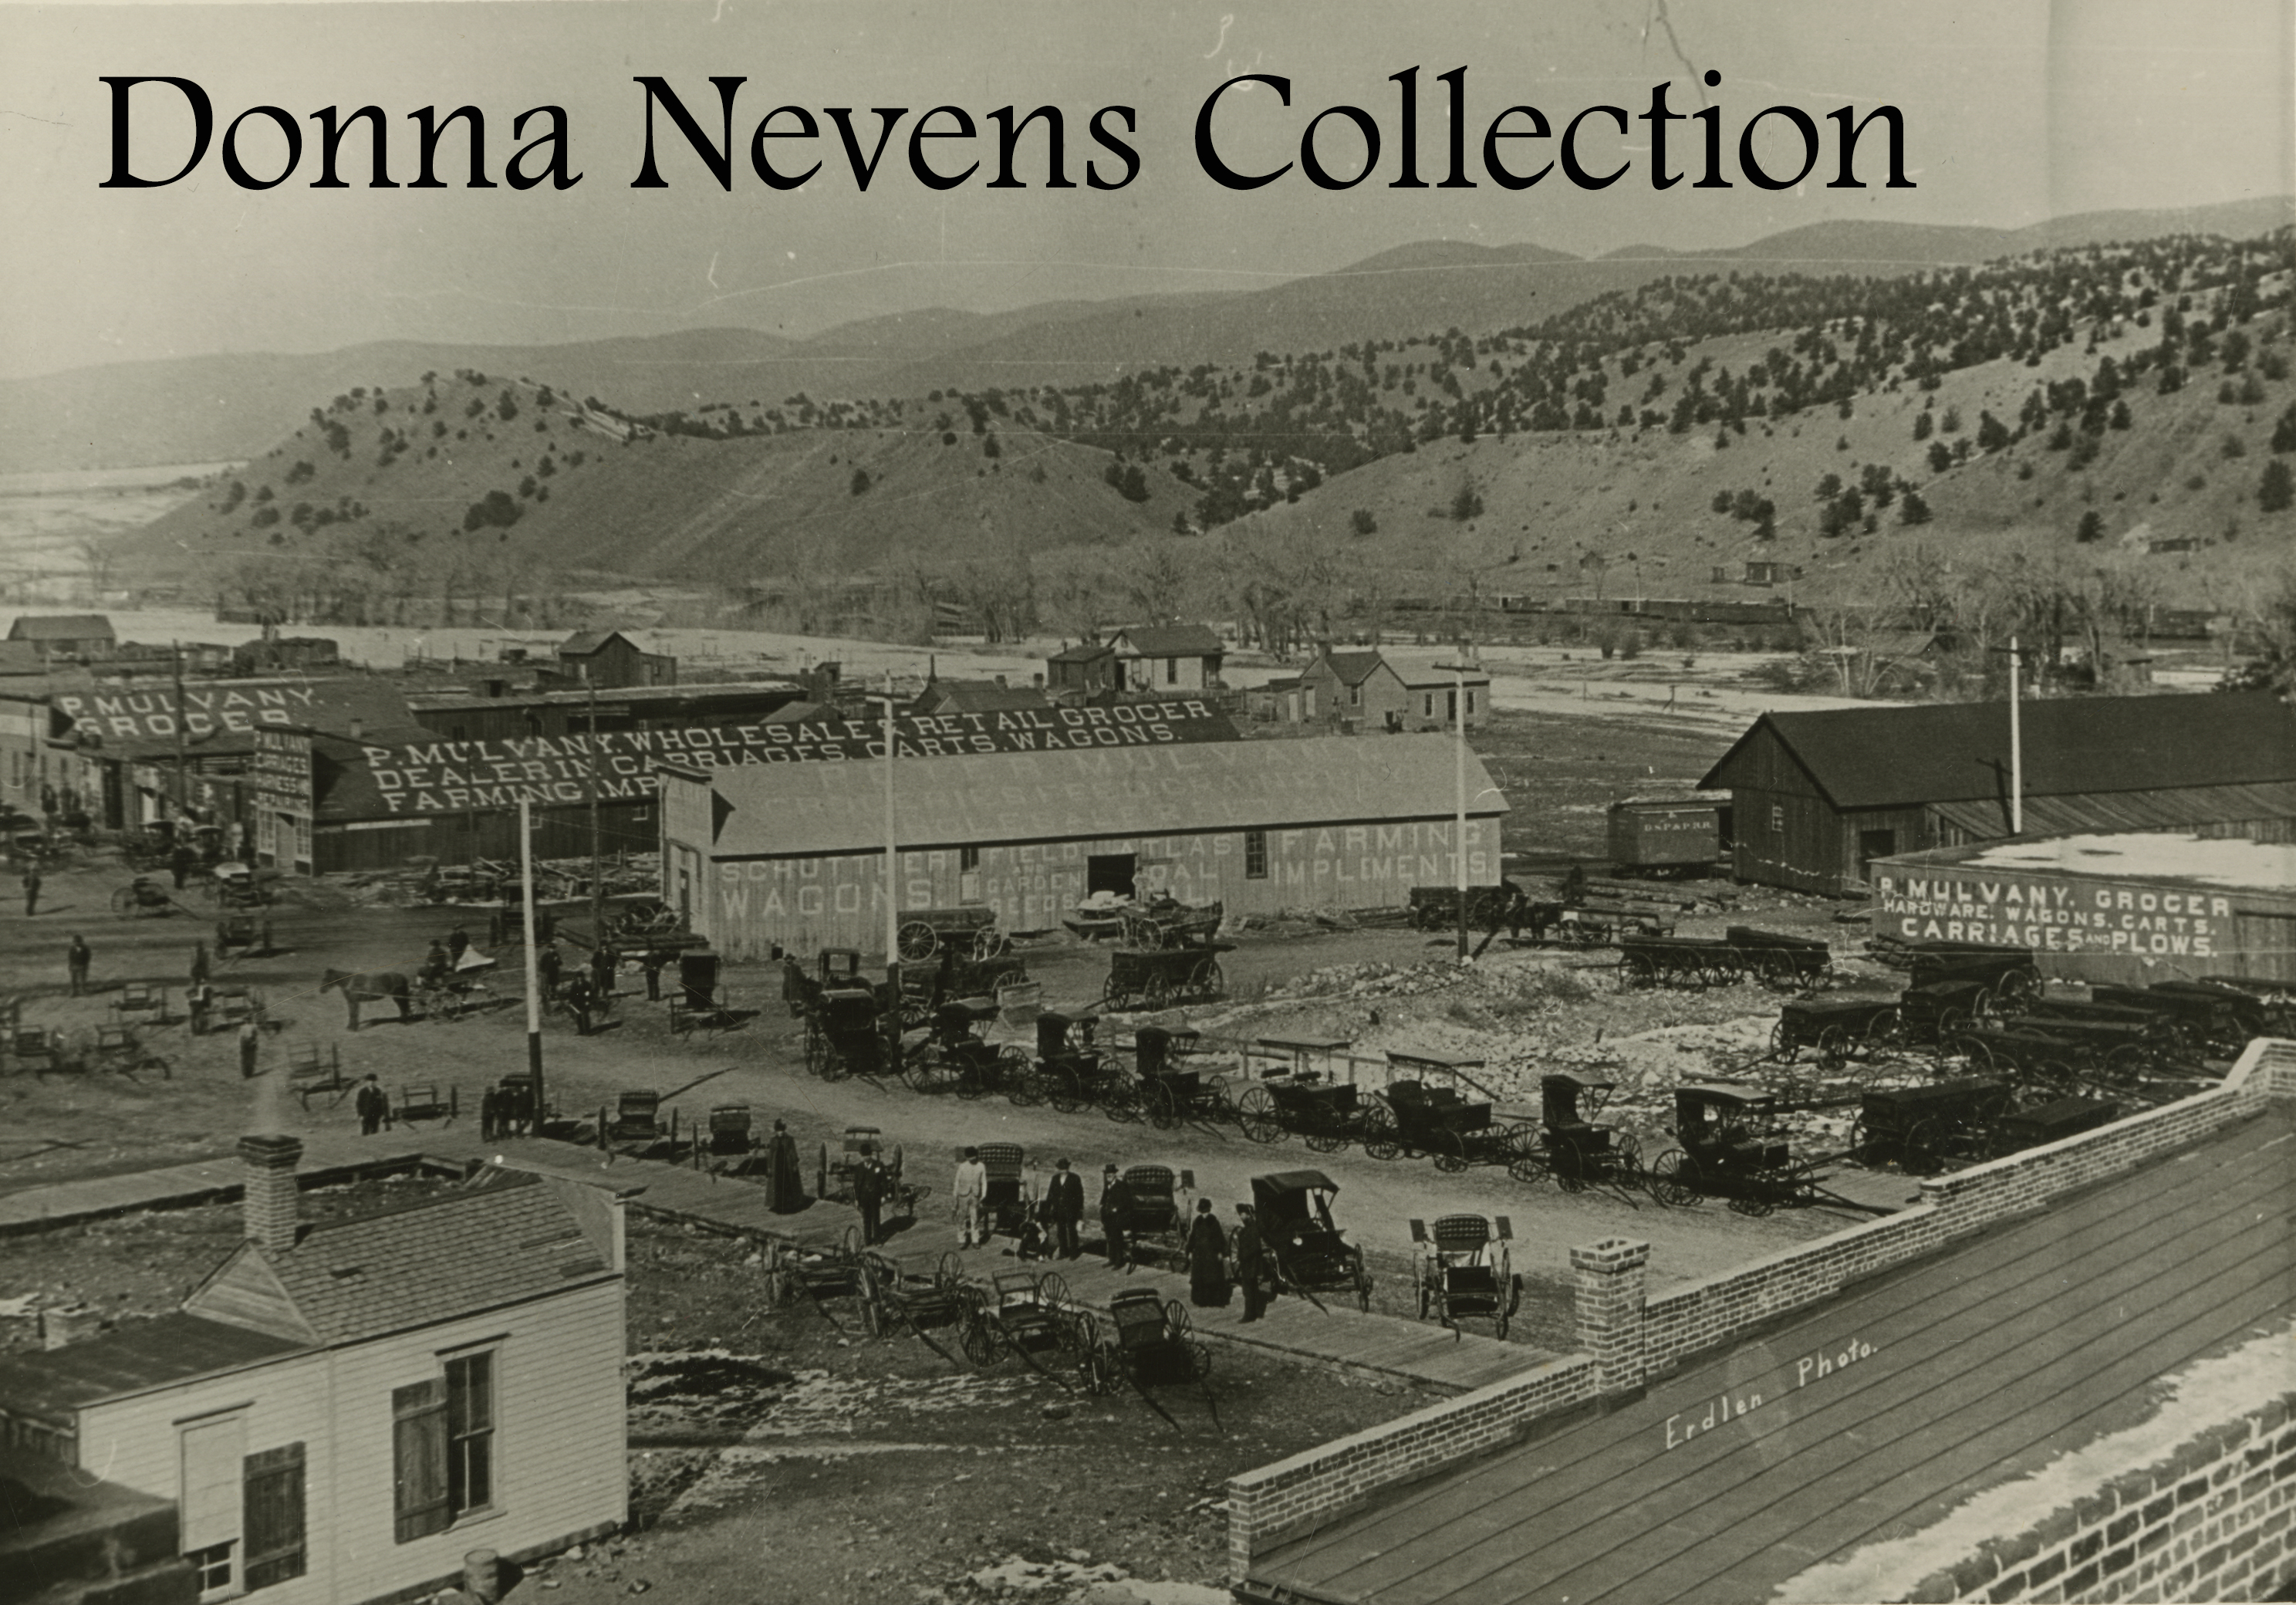 Donna Nevens Collection|urlencode